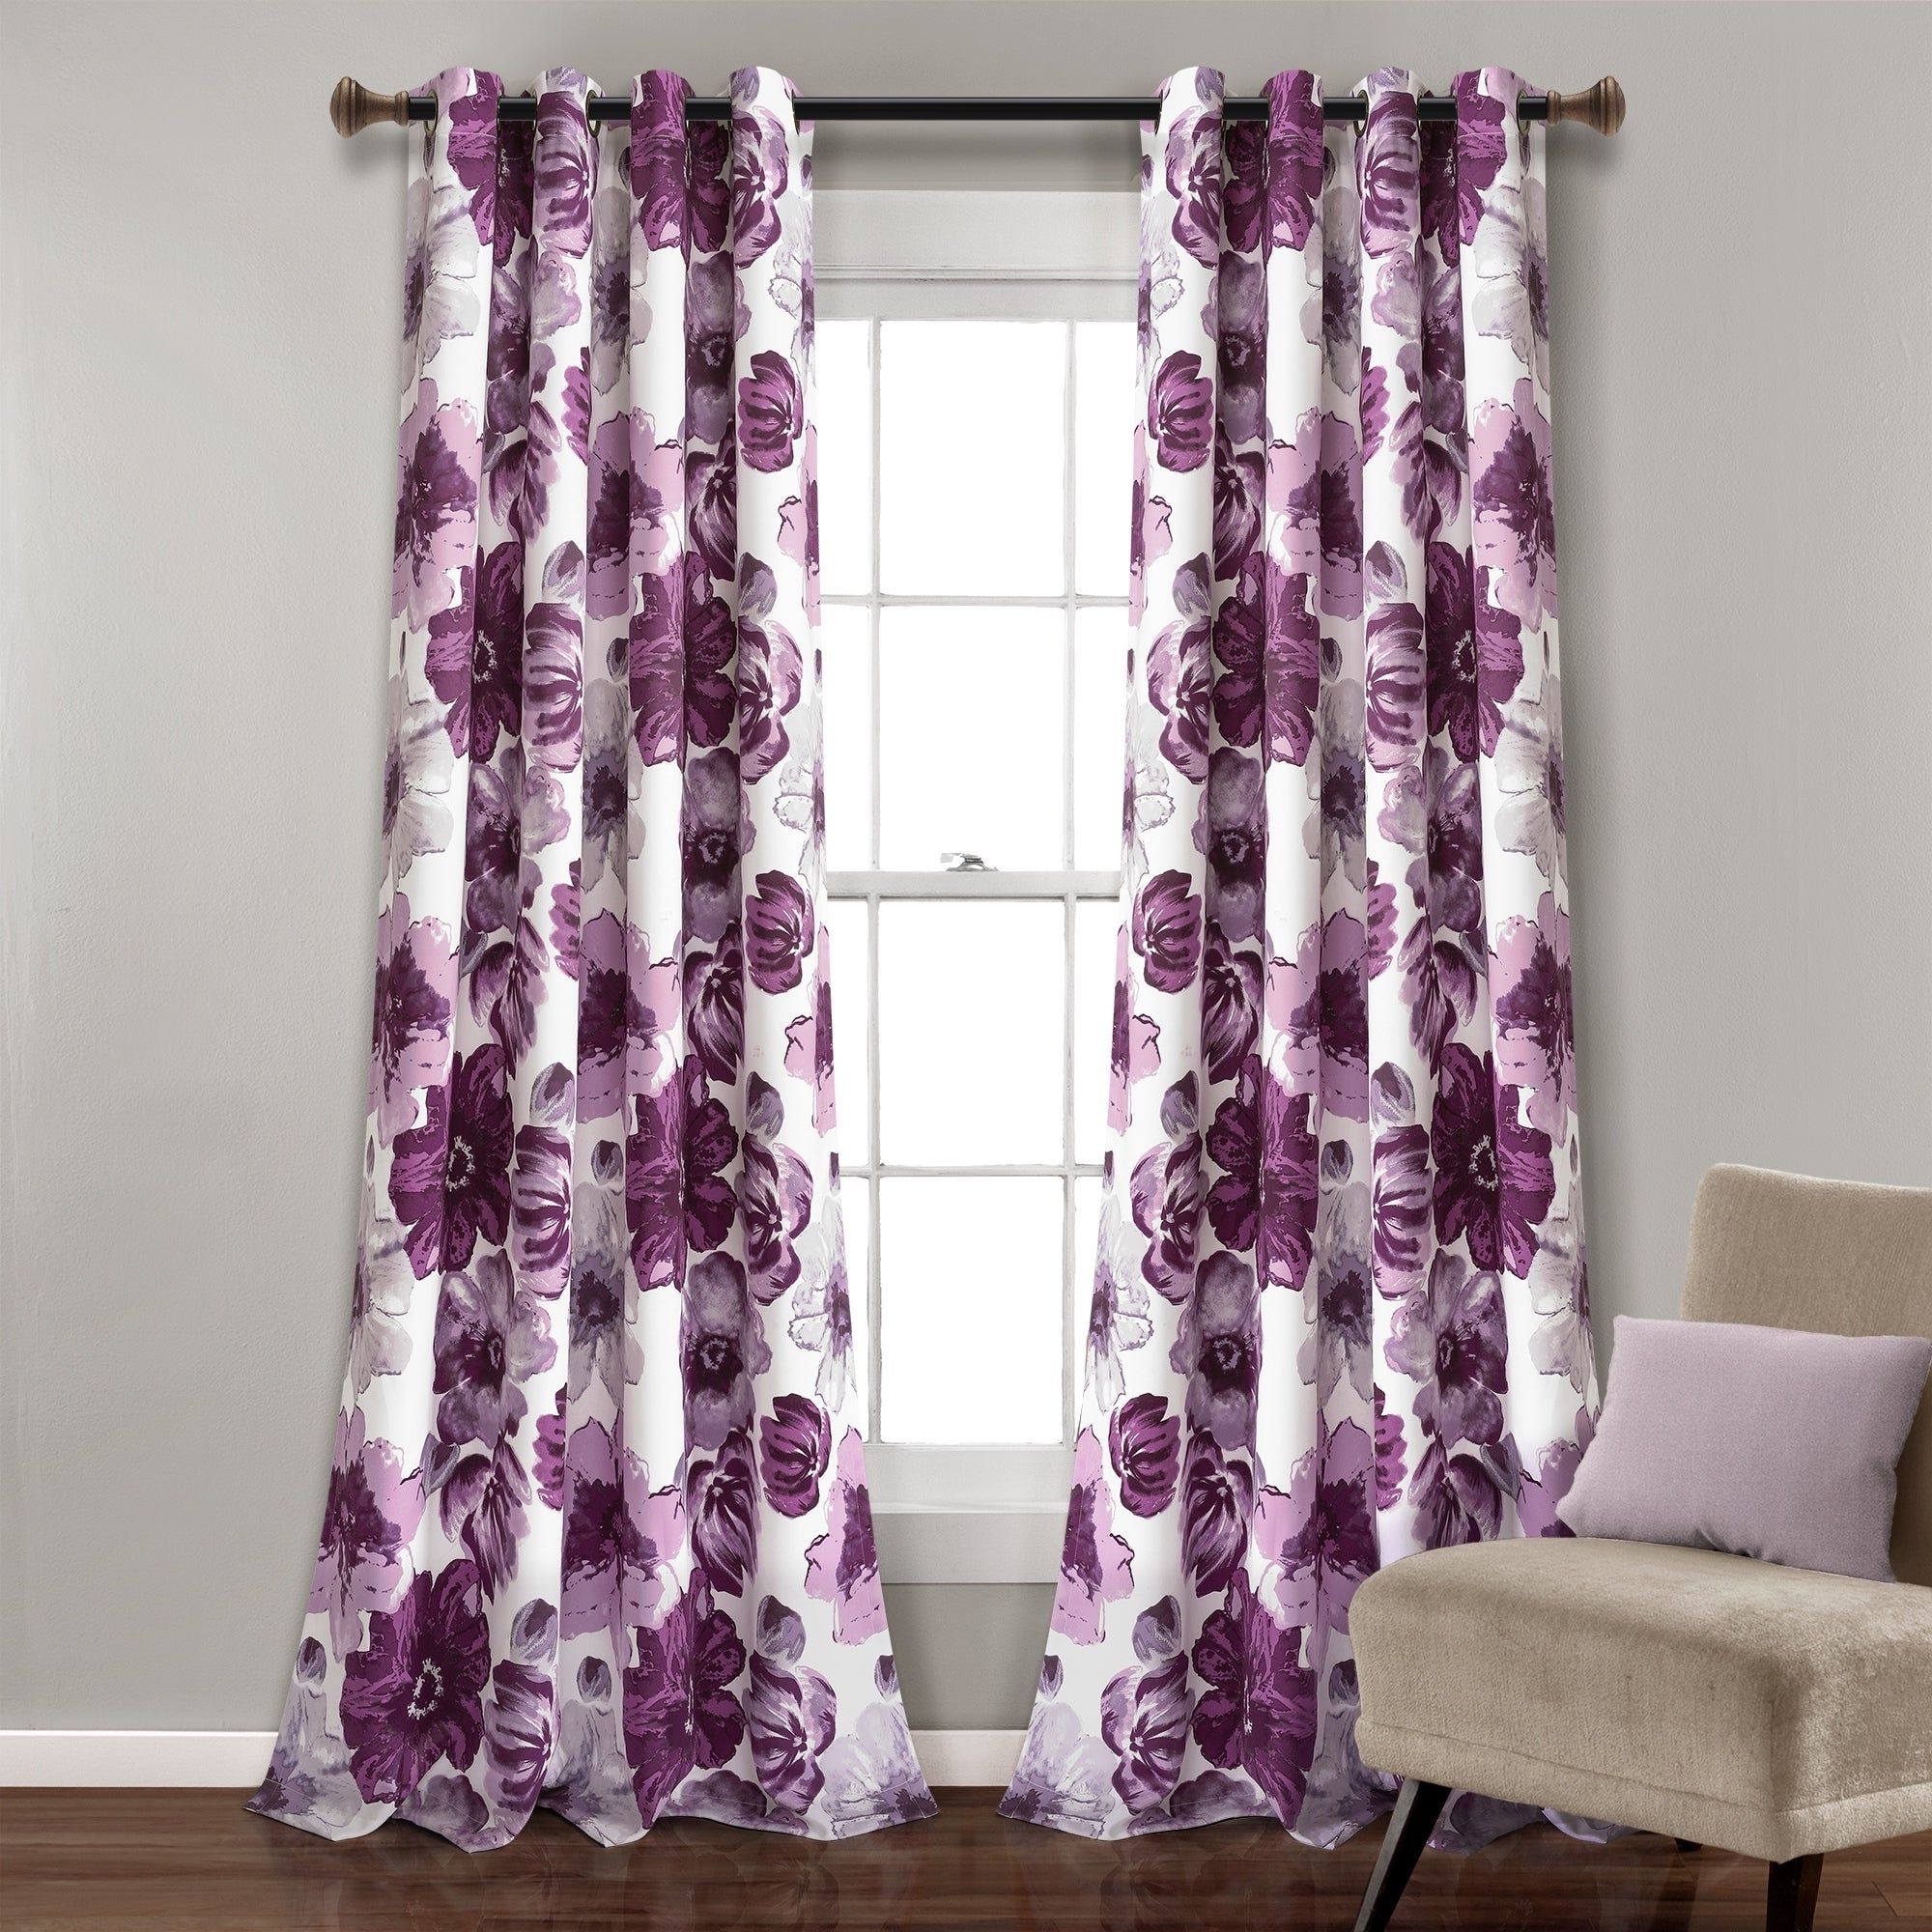 Lush Decor Leah Room Darkening Curtain Panel Pair Intended For Widely Used Leah Room Darkening Curtain Panel Pairs (View 14 of 20)